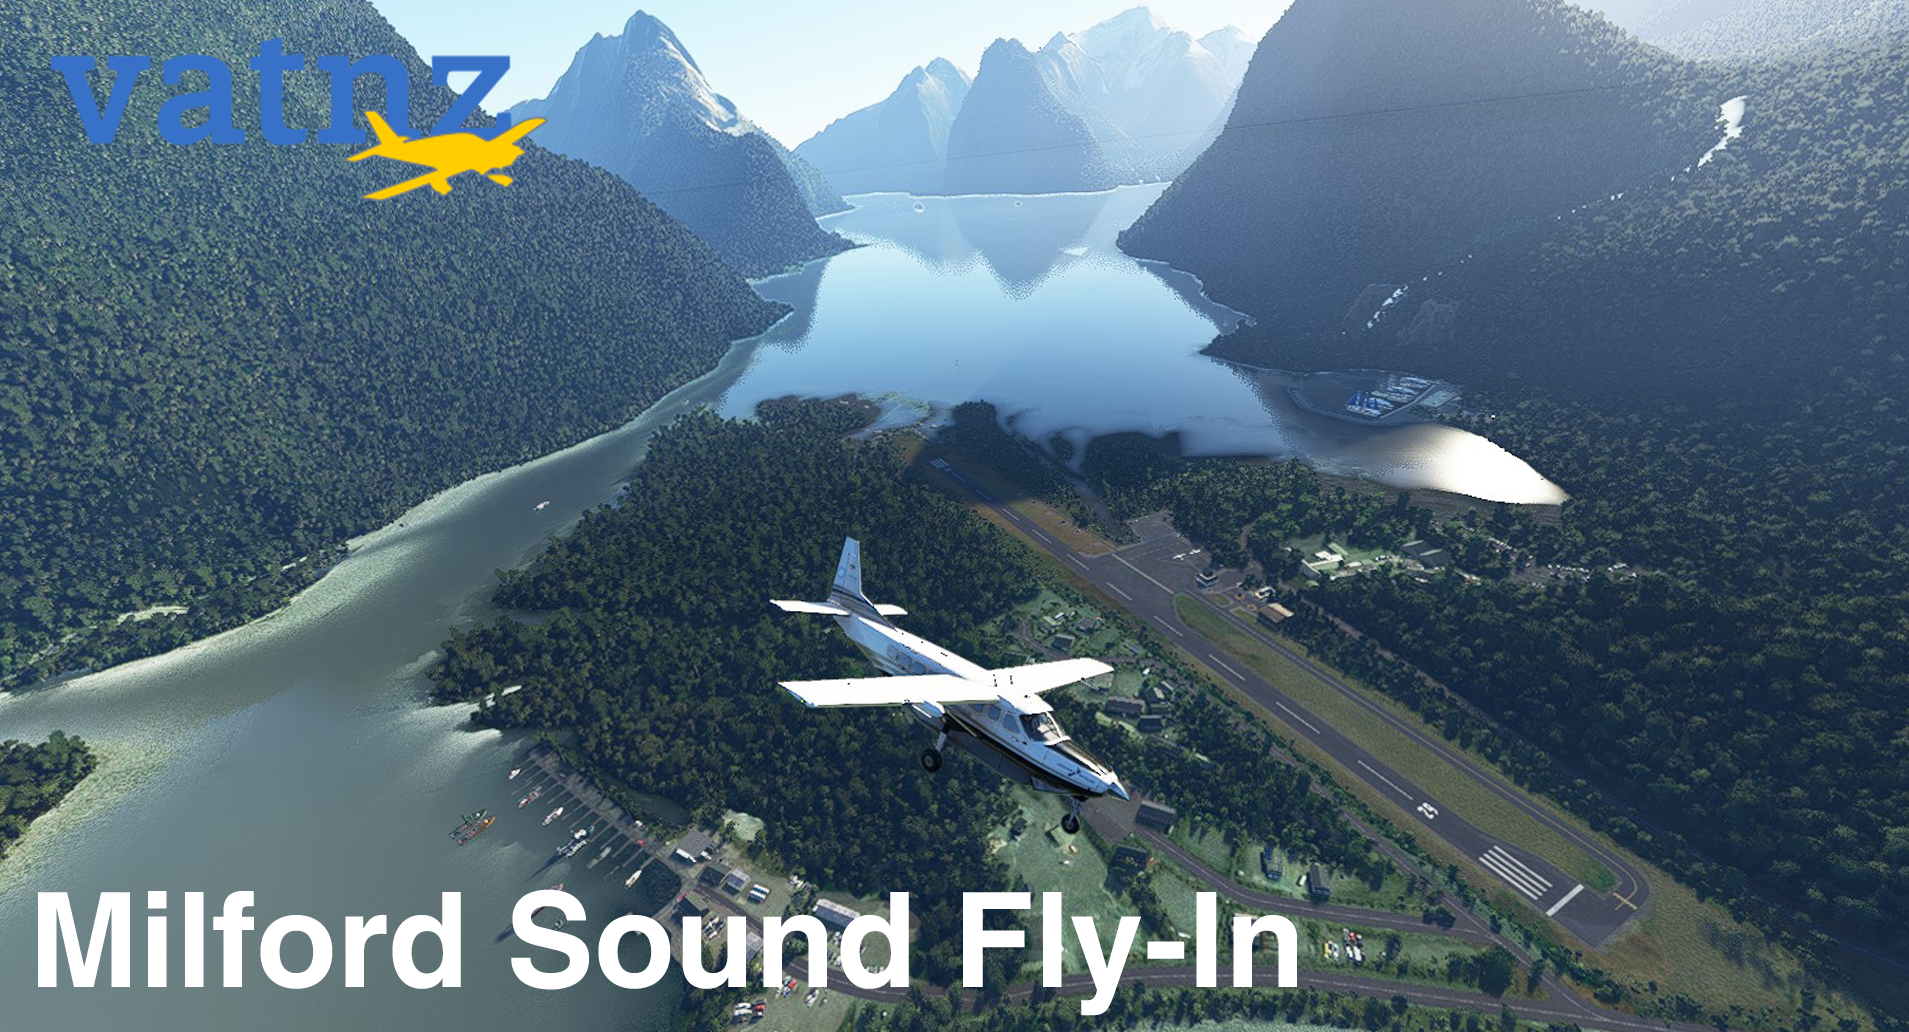 Milford Sound Fly-in